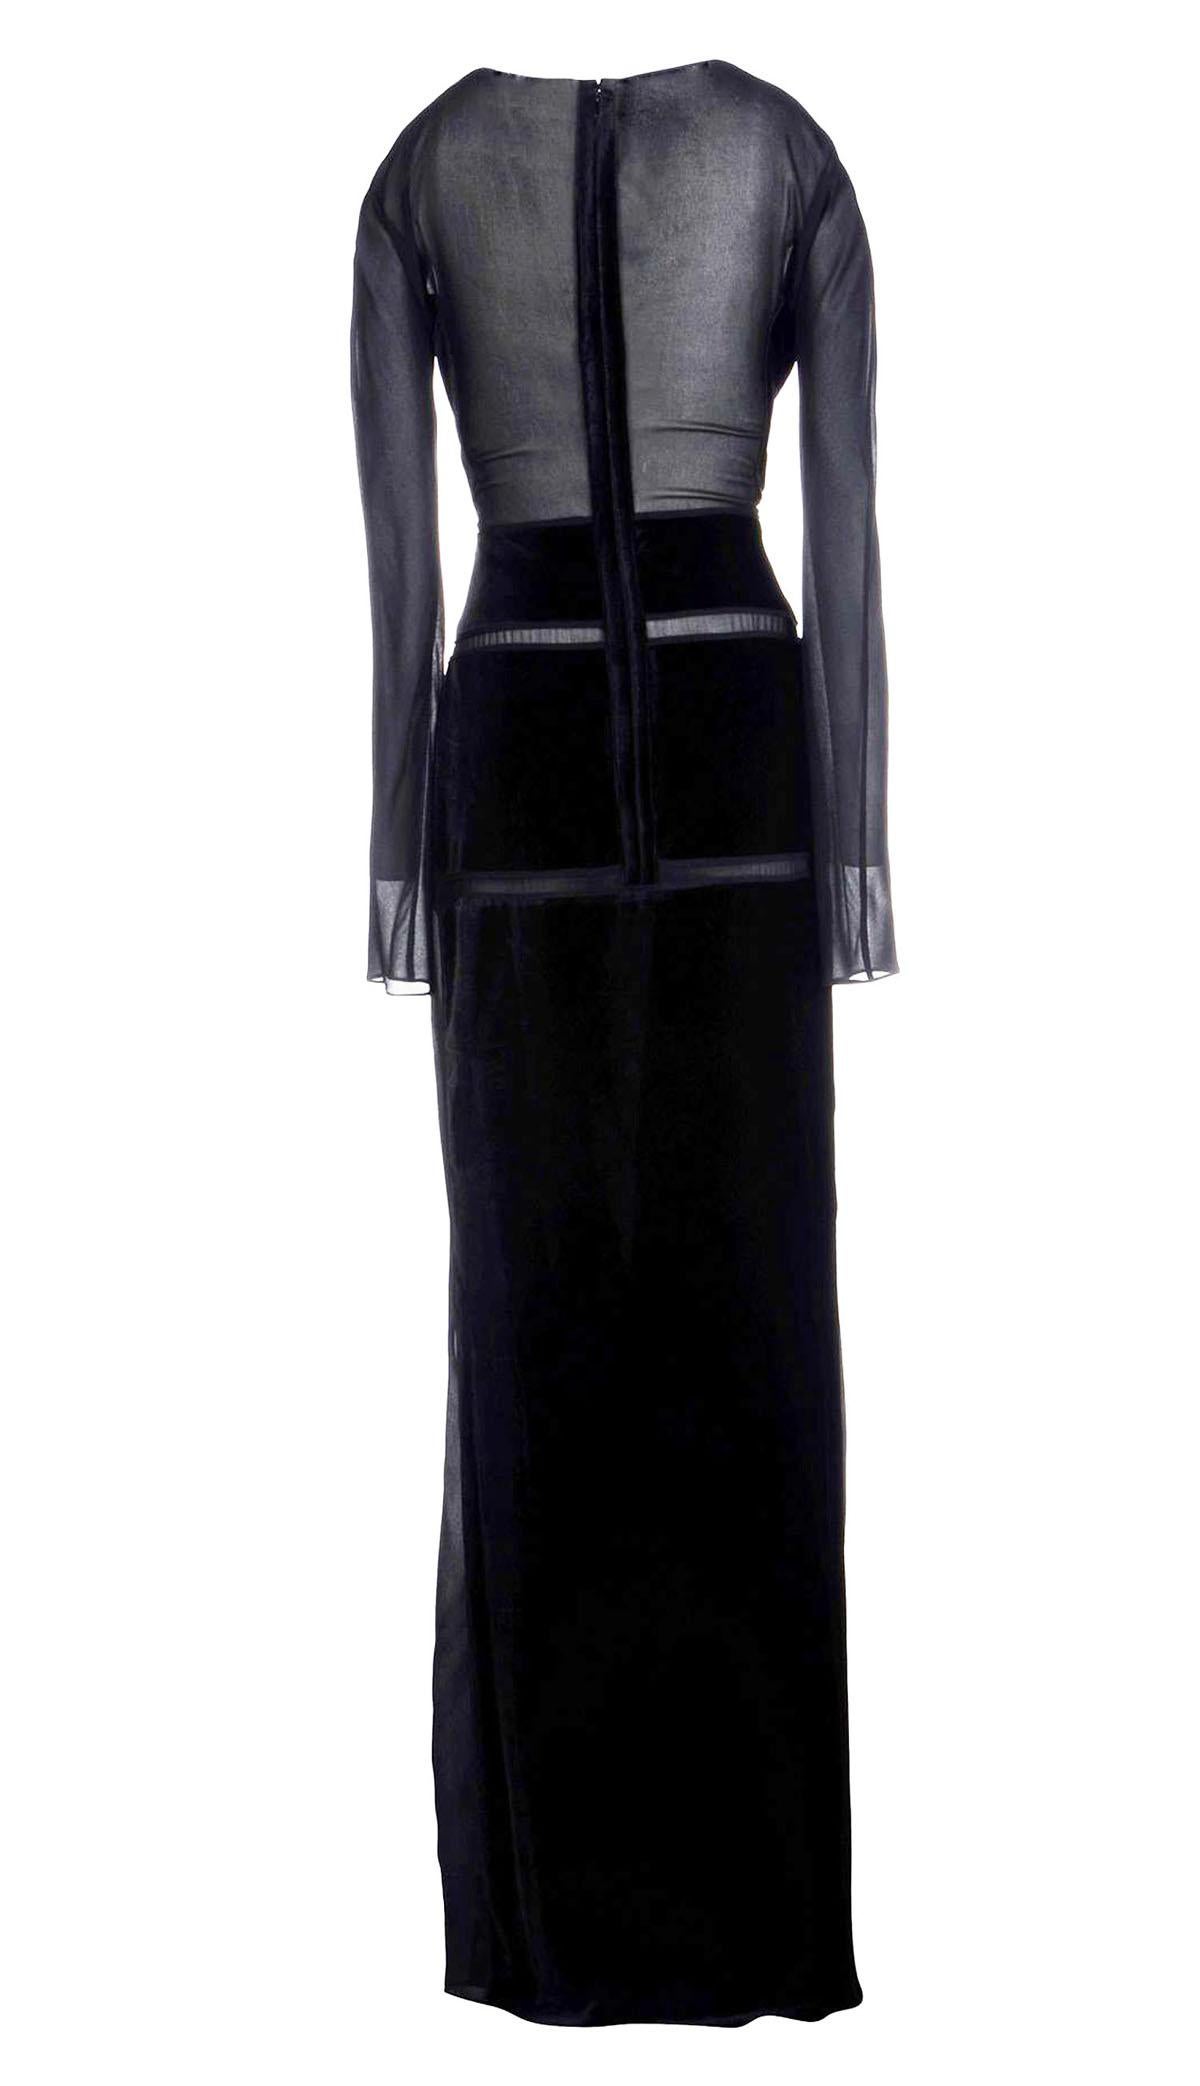 New Tom Ford Ad Campaign Velvet Gown
Italian size 42 - US 6/8
Black Velvet and Sheer Chiffon
Measurements: Length - 65 inches,  Bust - 34/36, Waist - 28/30.
Made in Italy
Belt Not Included
New with tag.